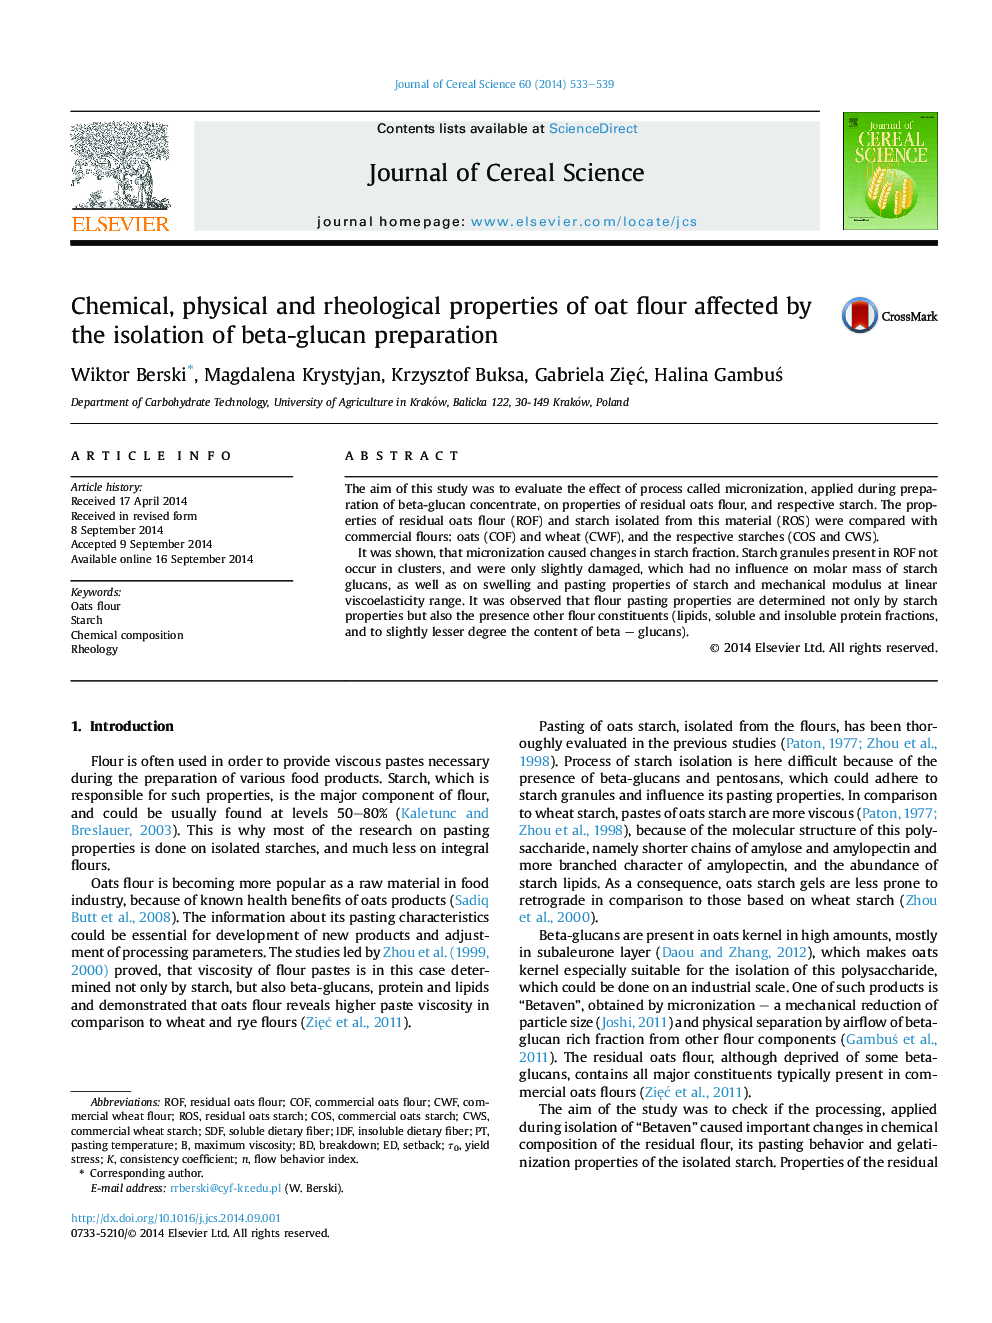 Chemical, physical and rheological properties of oat flour affected by the isolation of beta-glucan preparation